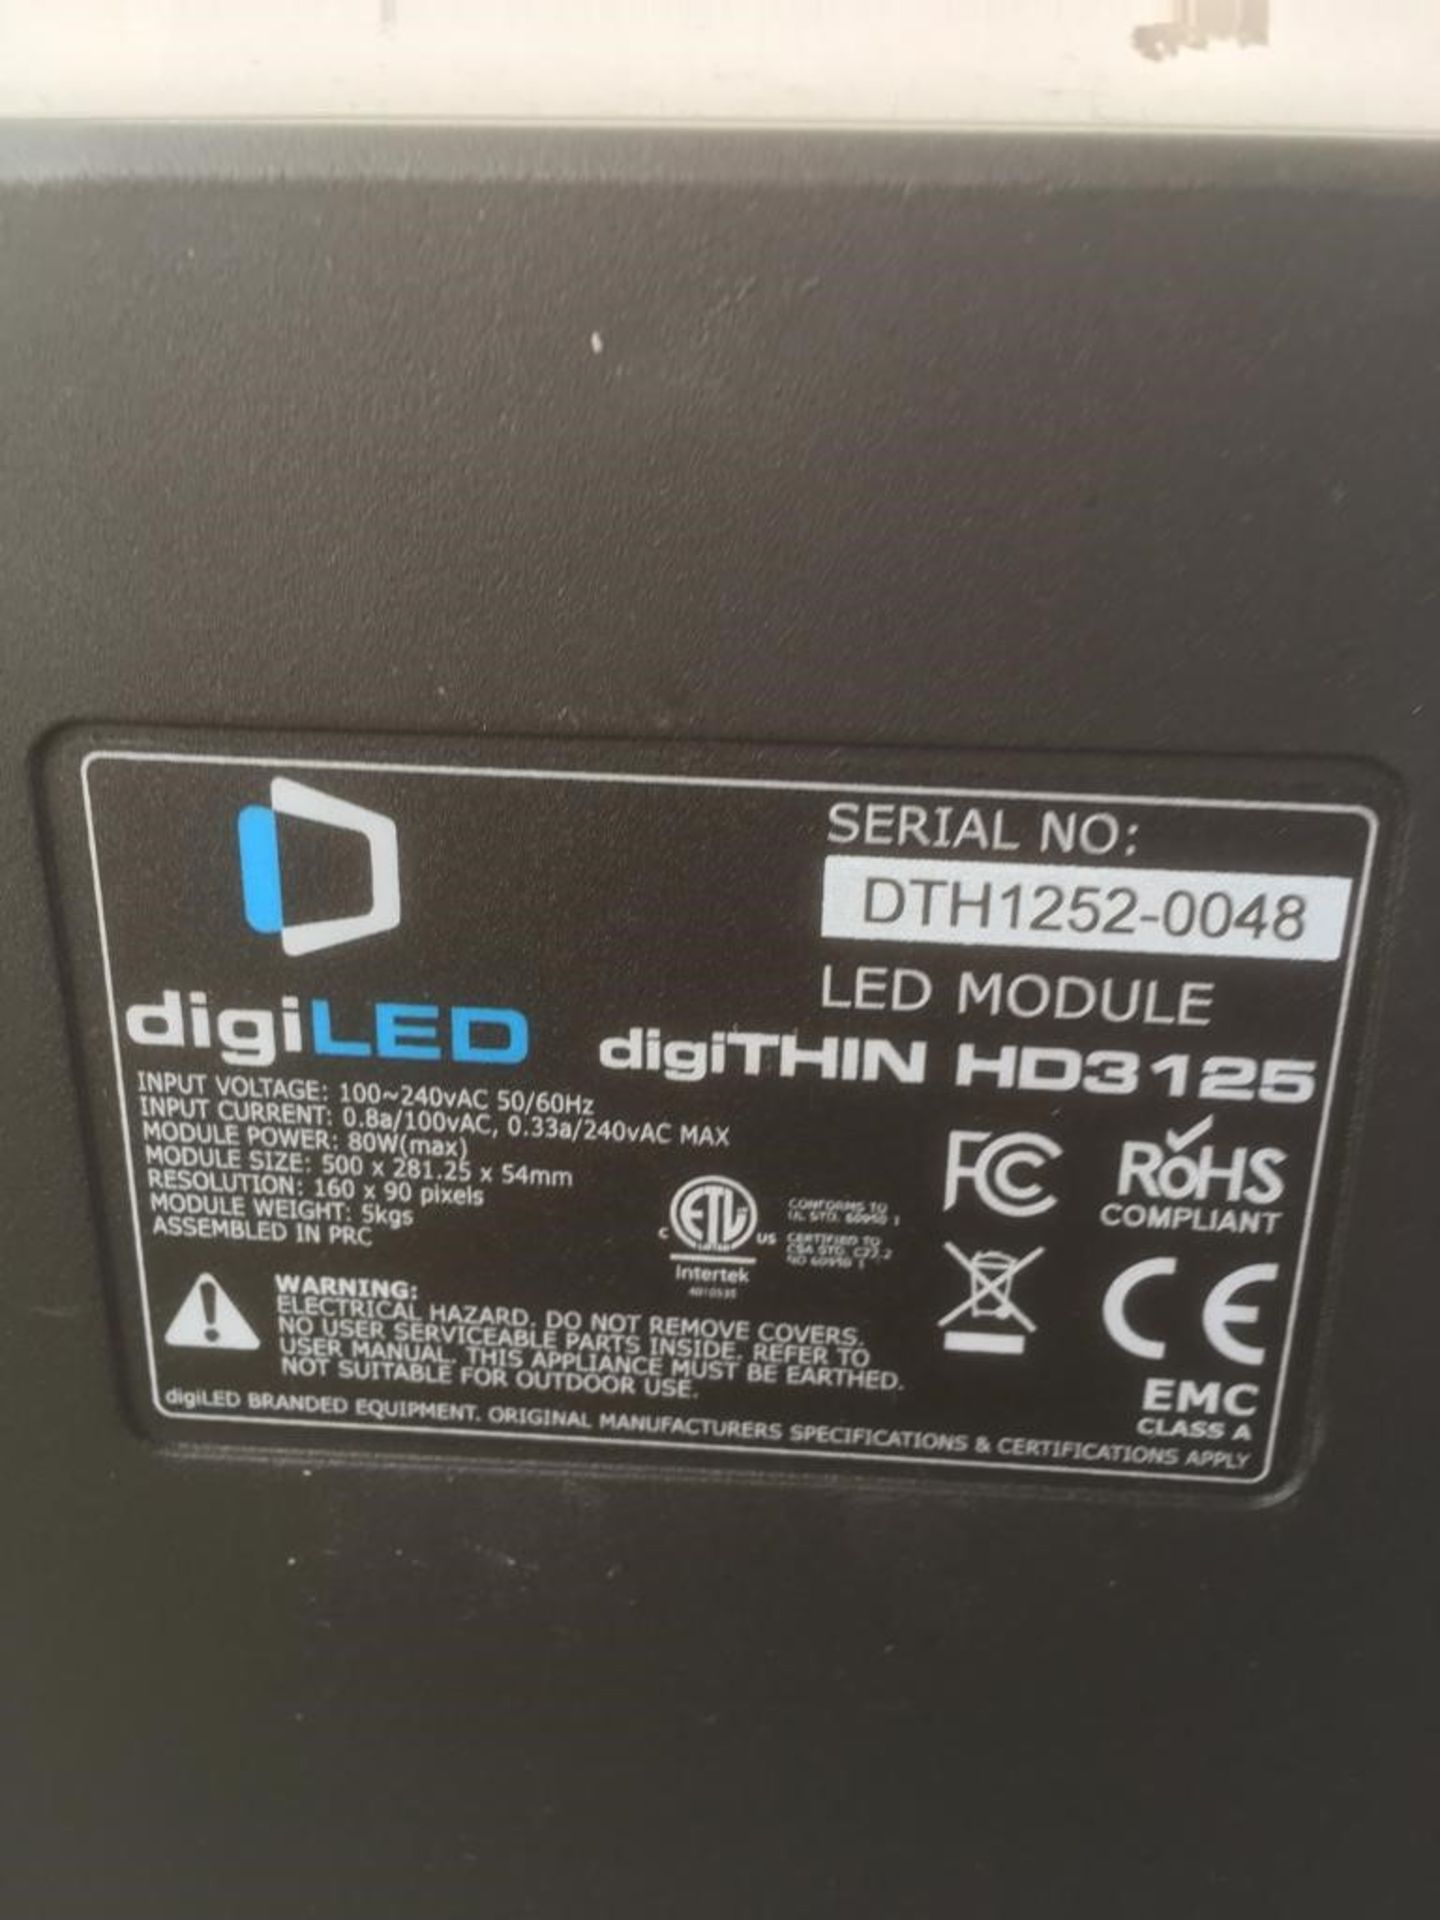 digiLED digiTHIN HD 3125 36 Module (12x3) Indoor LED HD screen - Image 3 of 5